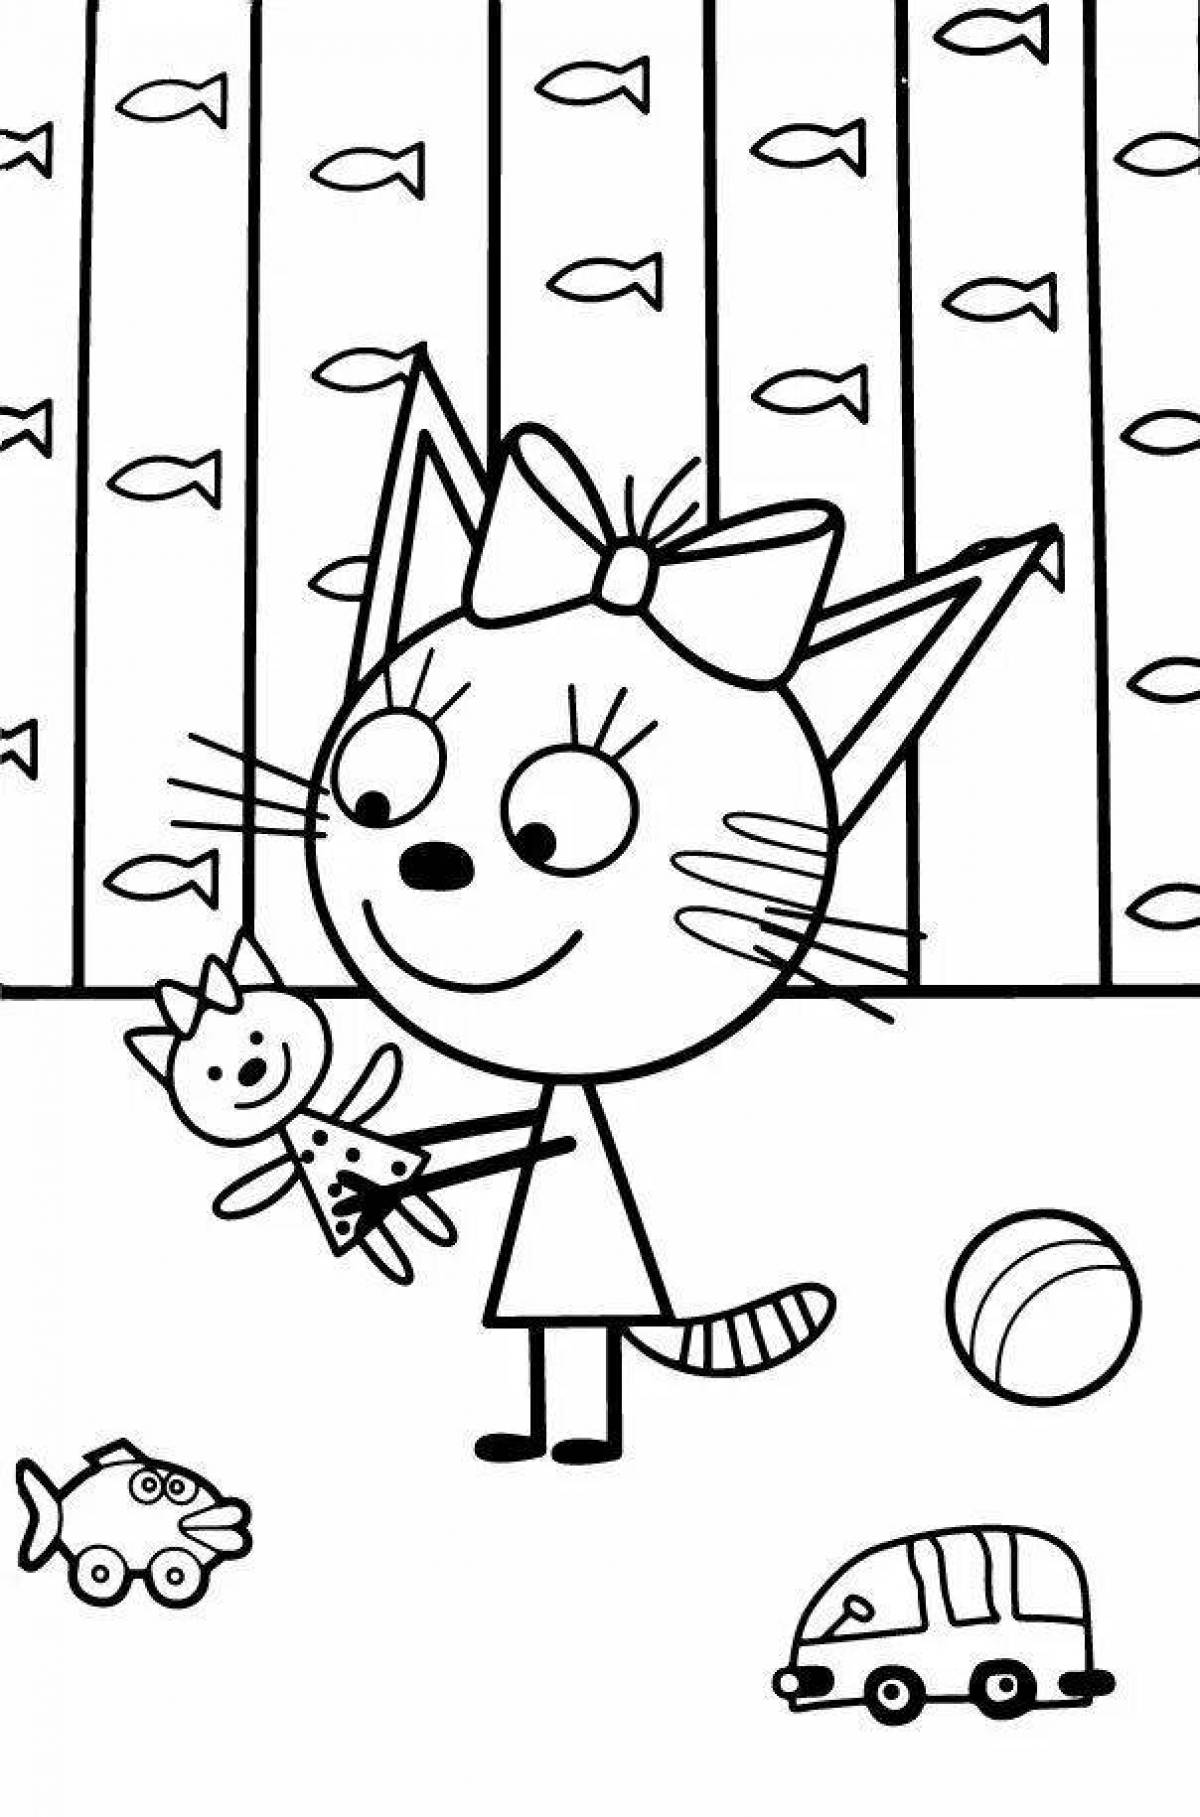 Drawing three cats coloring page